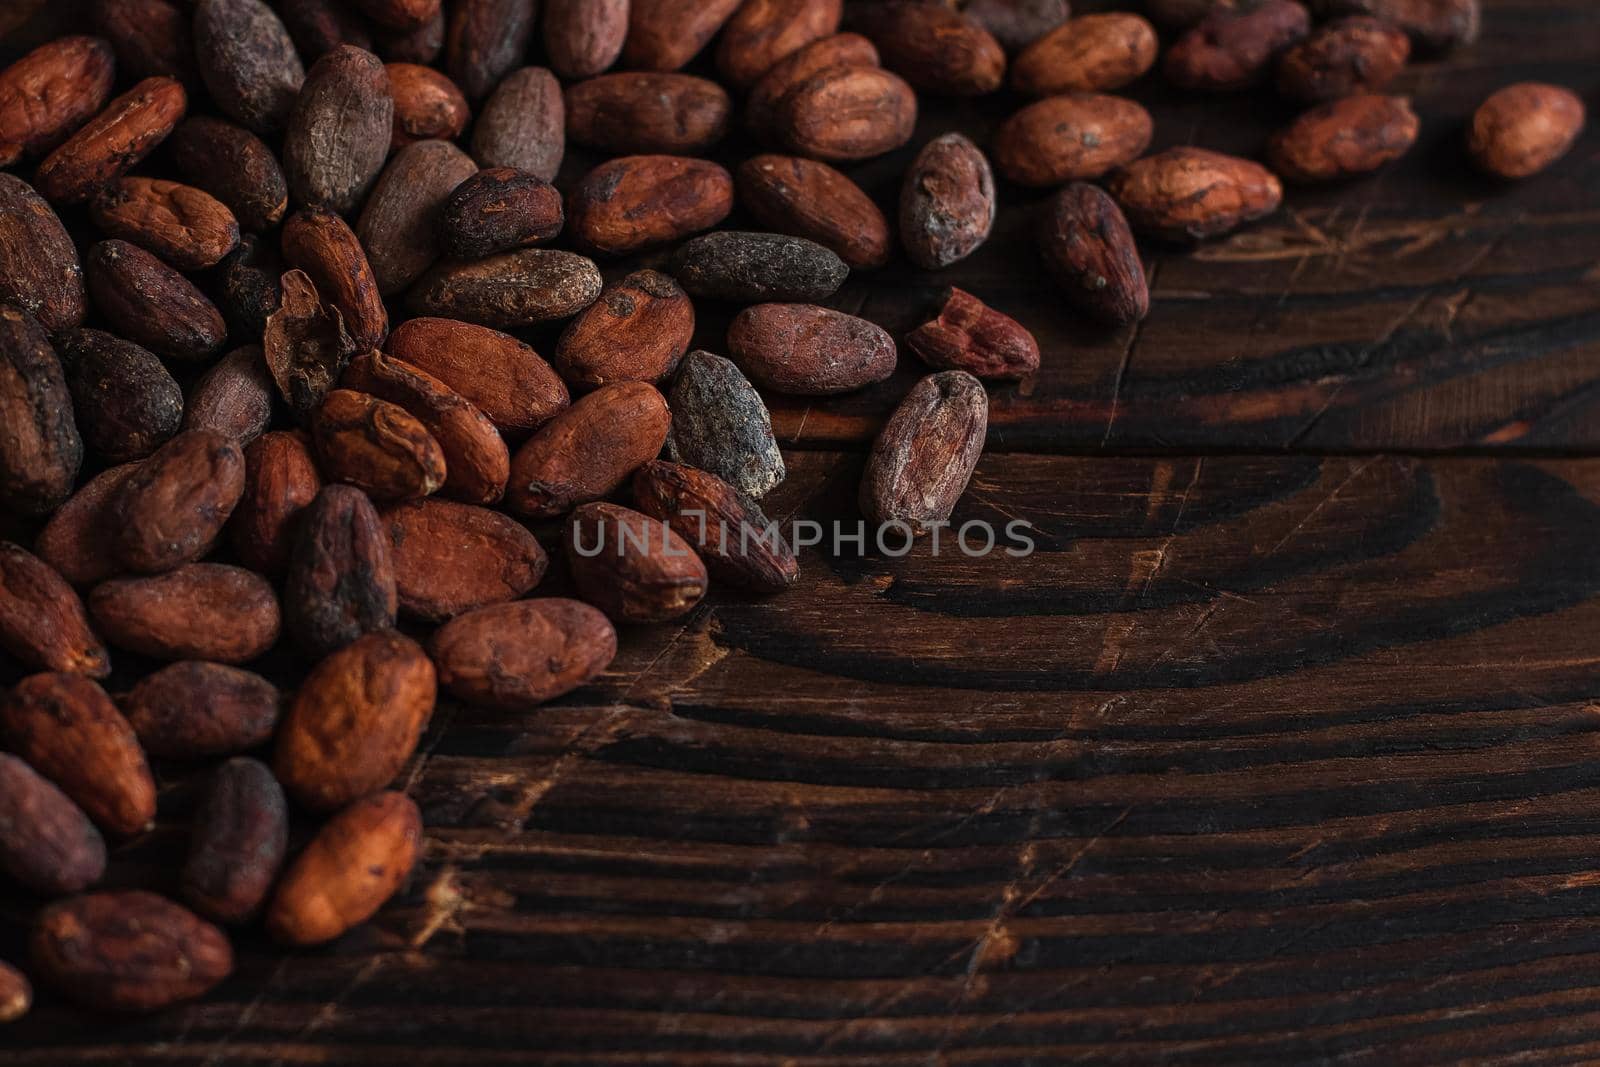 Raw cocoa beans two types Venezuela on brown background.